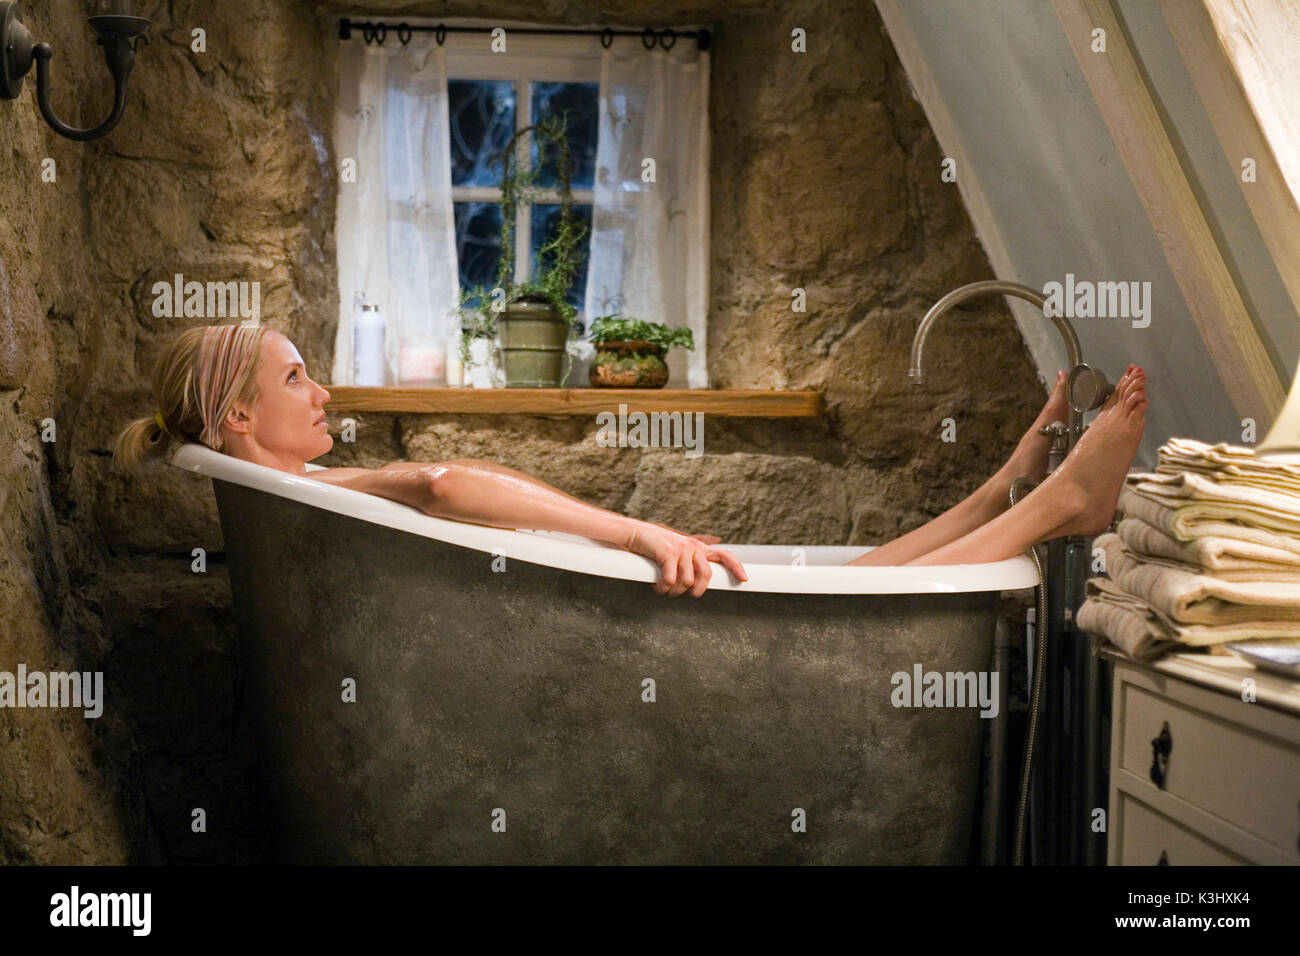 Cameron Diaz stars in Columbia Pictures/Universal Pictures' romantic comedy THE HOLIDAY CAMERON DIAZ Cameron Diaz stars in Columbia Pictures/Universal Pictures romantic comedy     Date: 2006 Stock Photo